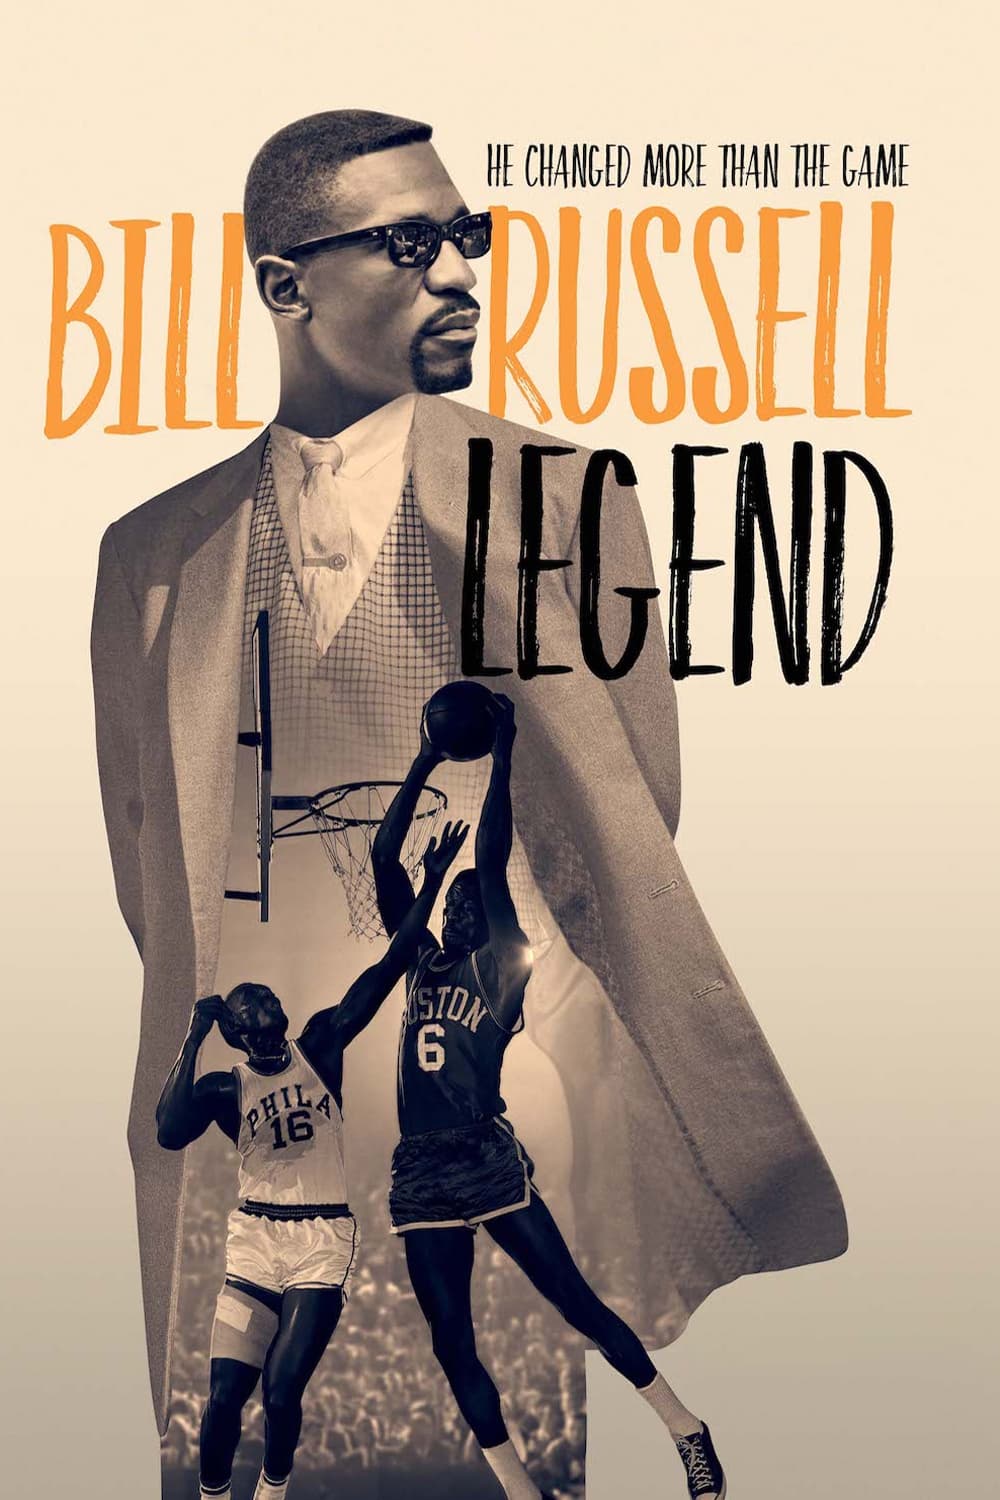 Bill Russell: Legend TV Shows About Jim Crow Laws